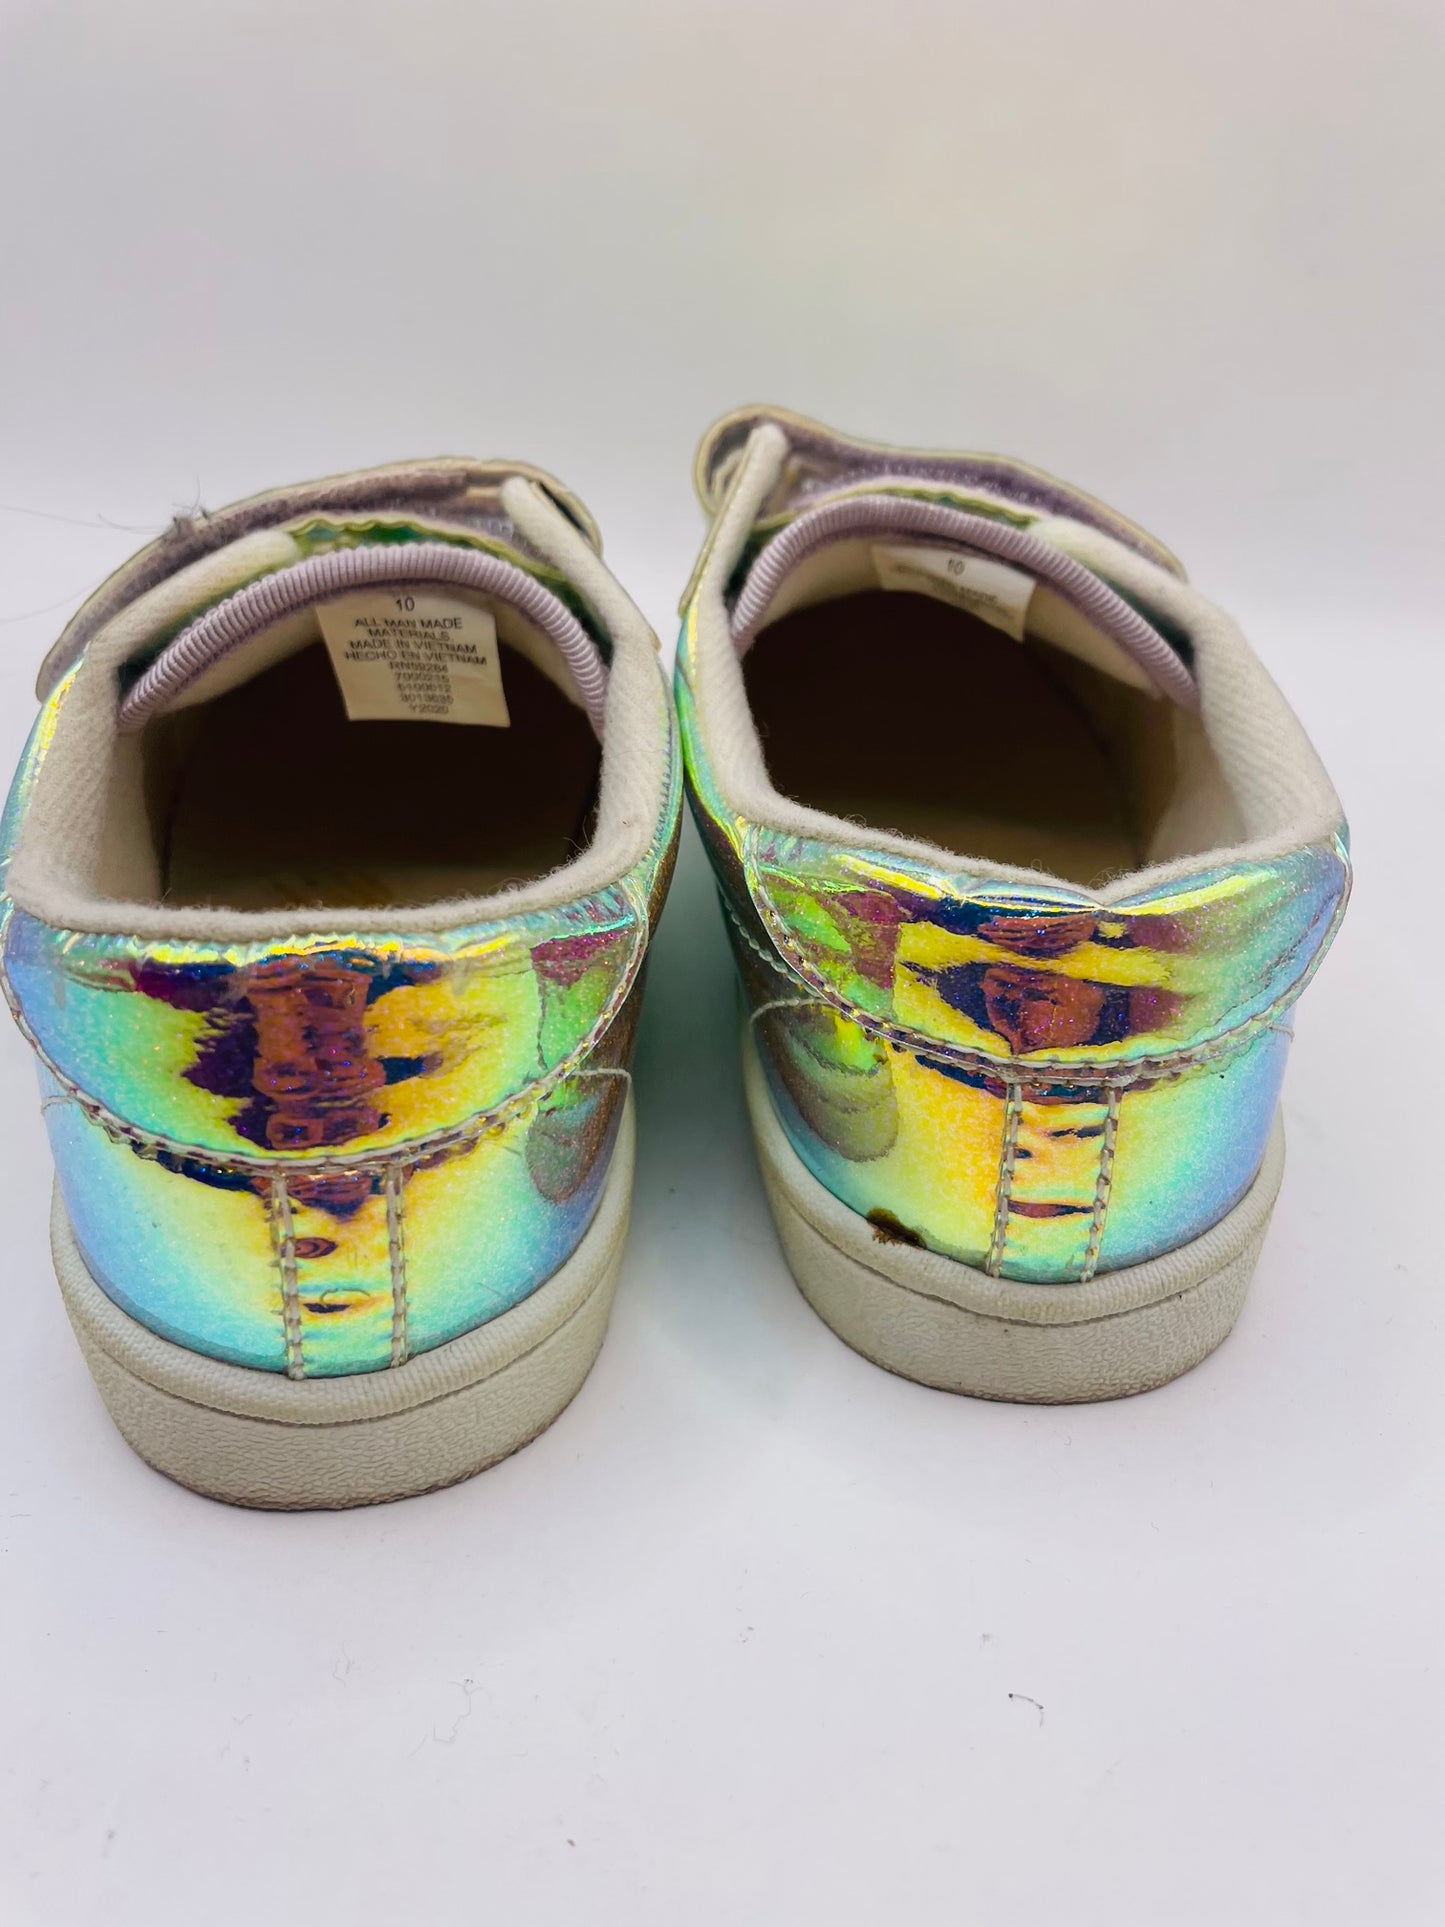 Place kids sneakers